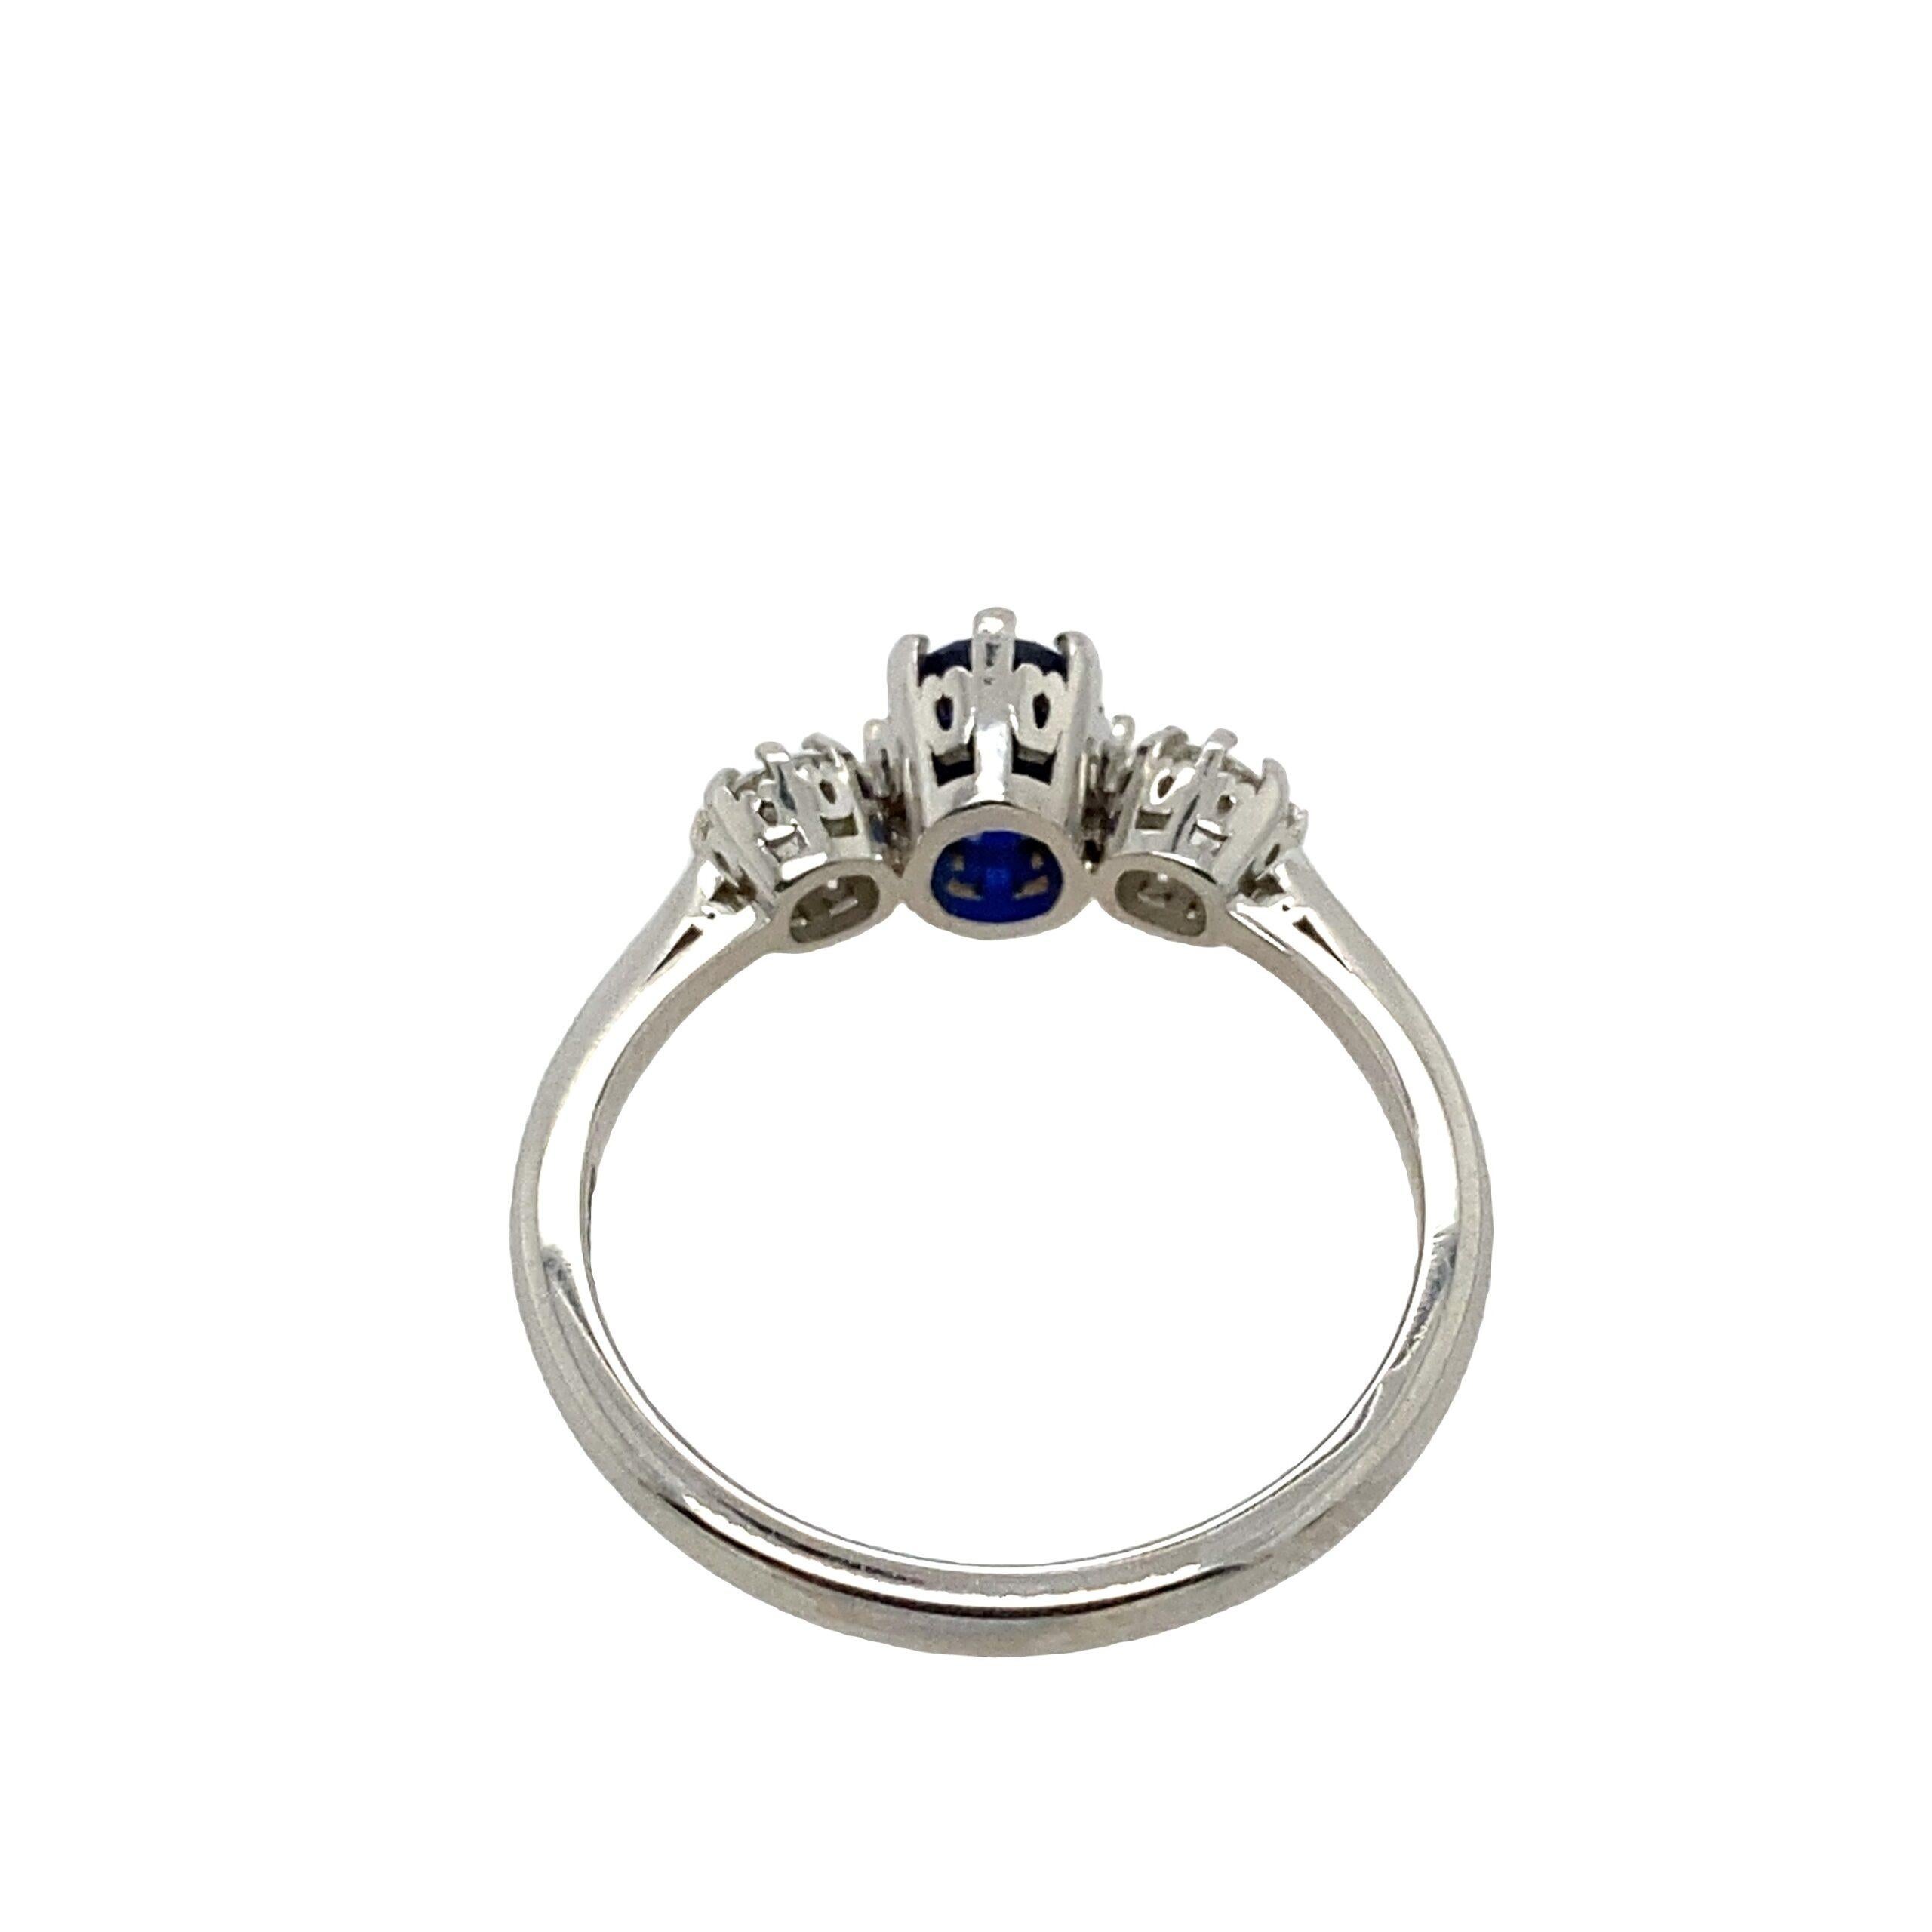 Platinum 3 Stone Very Finest Blue 0.96ct Sapphire and 0.38ct Diamond Ring

Additional Information:
Sapphire Weight: 0.96ct
Total Diamond Weight: 0.38ct
Diamond Colour: G
Diamond Clarity: VS
Total Weight: 3.7g
Ring Size: N